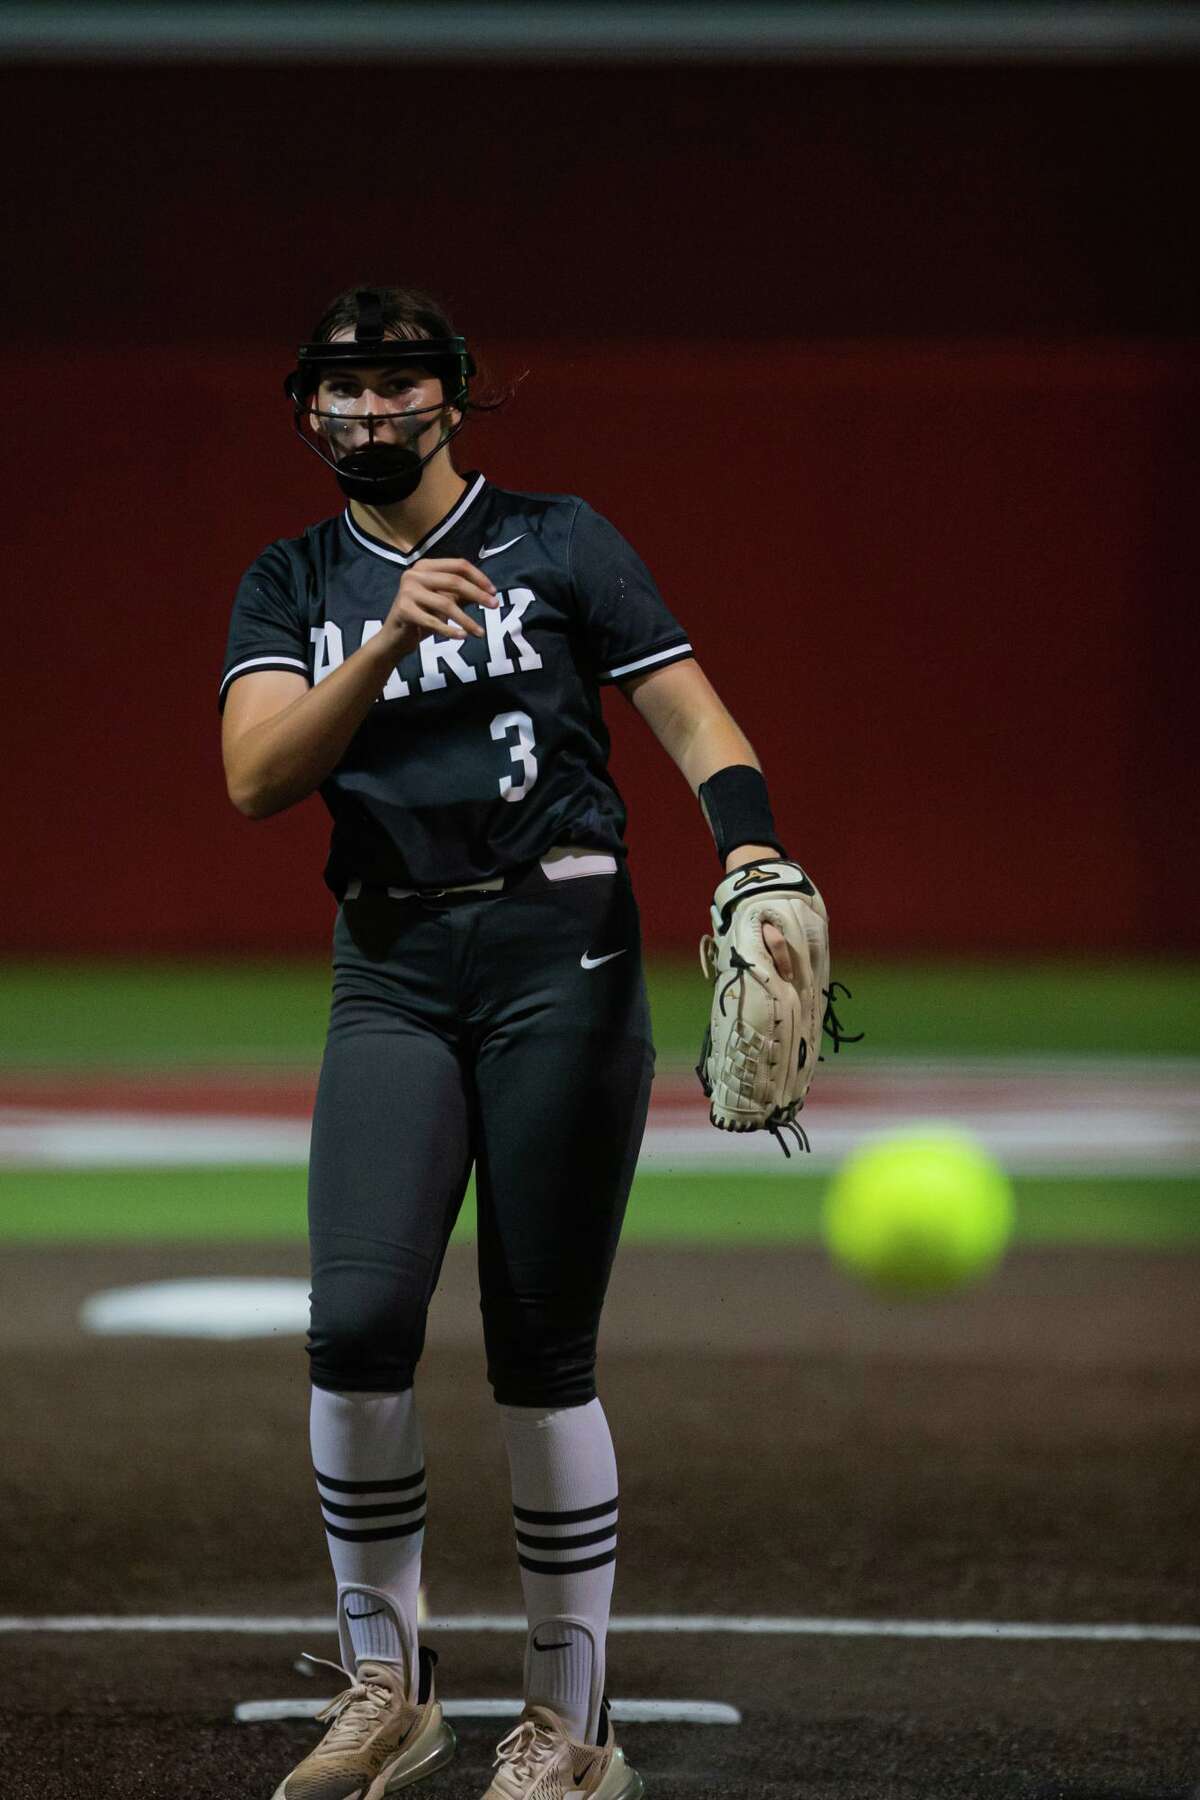 Kingwood Park pitcher Erika Savage (3) pitching against Santa Fe during a High school softball playoffs Region III-5A semifinals, one-game playoff Santa Fe vs. Kingwood, Thursday, May 19, 2022, in Crosby. Santa Fe defeated Kingwood Park 9-0. (Juan DeLeon/Contributor)